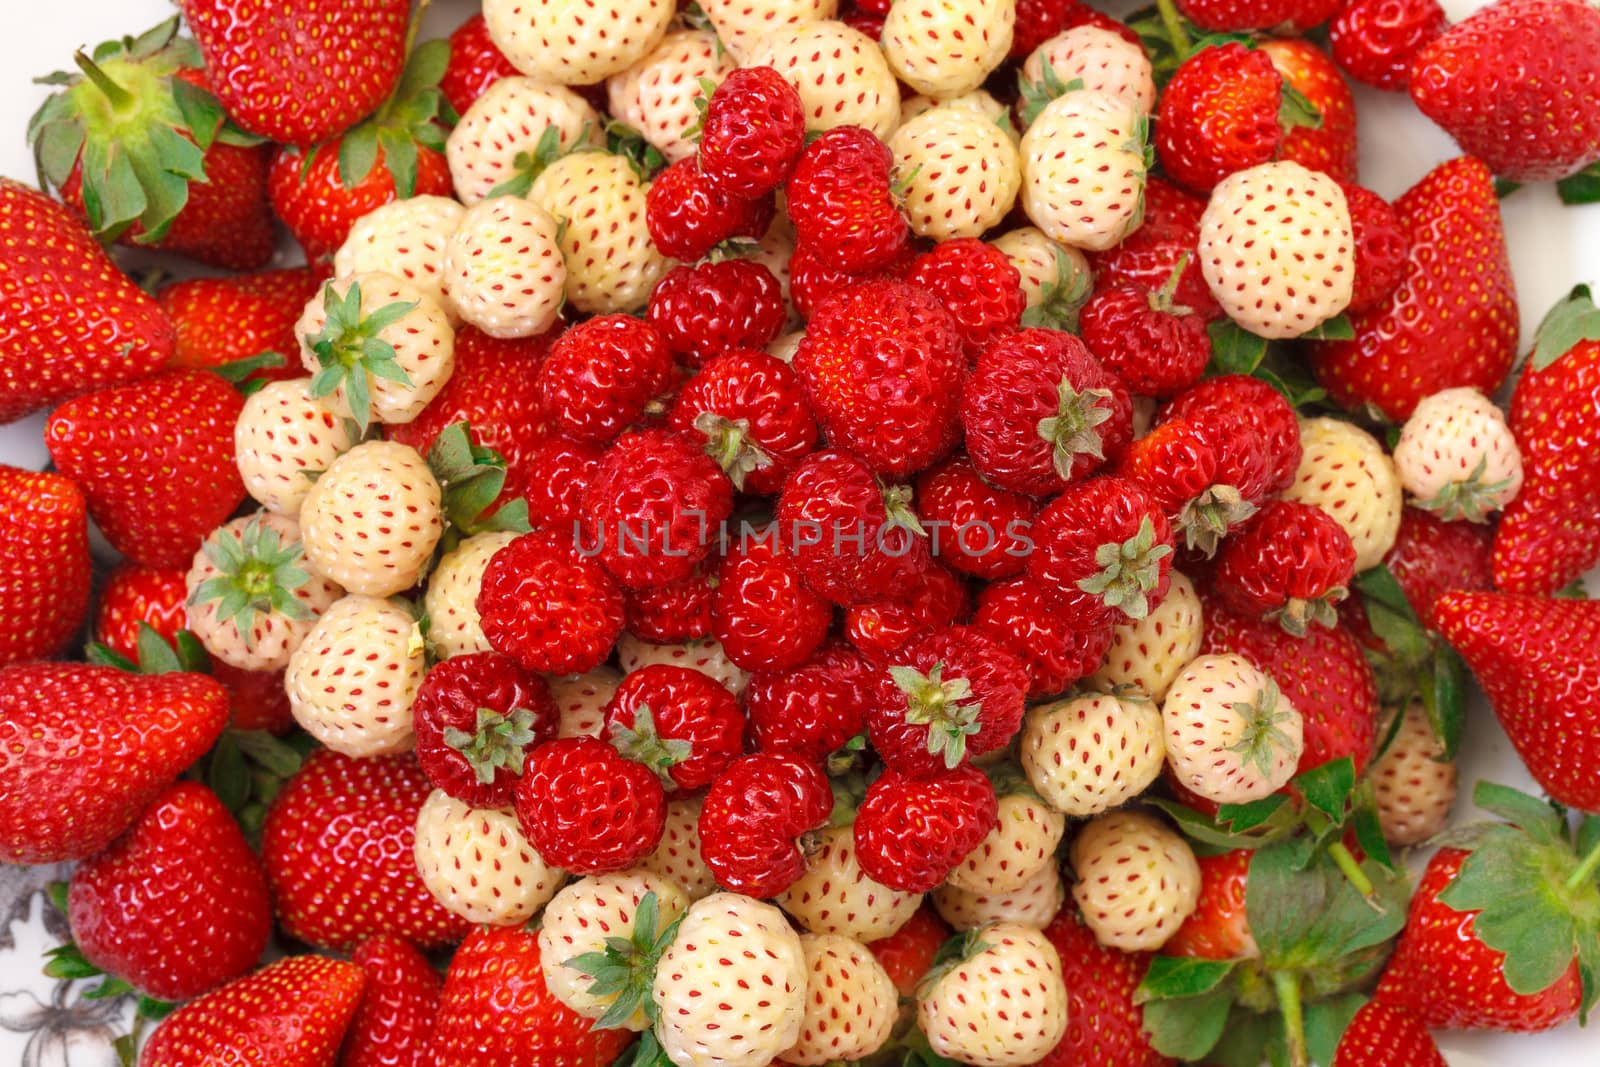 Ripe White and Red Strawberries on plate by Discovod